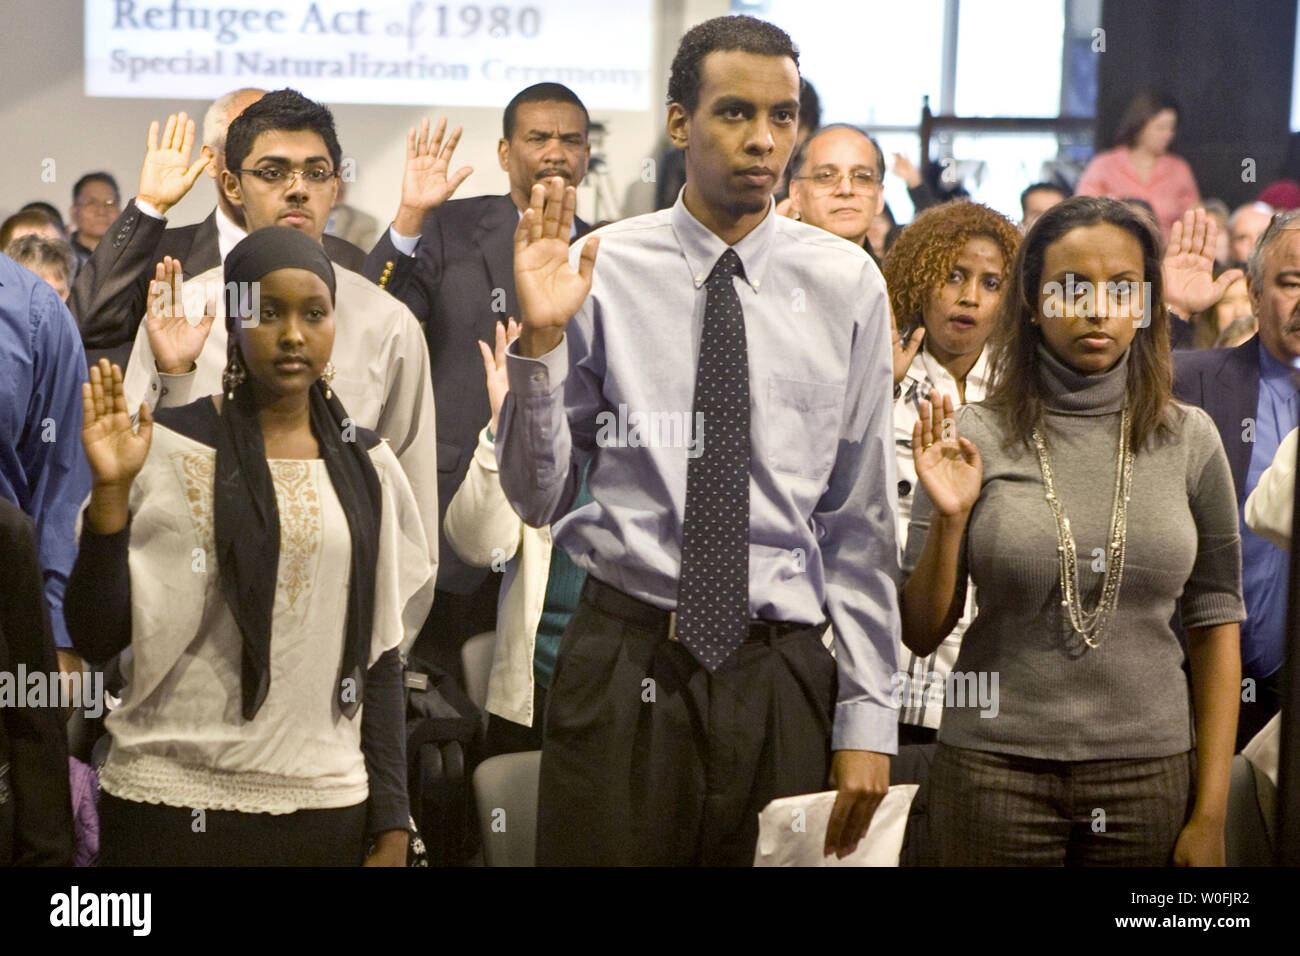 Yasmin Said from Somalia, Robel Tsehai from Ethiopia, and Bethel Tsehai from Ethiopia (L-R) take the Oath of Allegiance during a naturalization ceremony commemorating the 30th anniversary of the Refugee Resettlement Act of 1980. 27 new citizens from Egypt, Ethiopia, Iran, Pakistan, Philippines, Sierra Leone, Somalia, Sudan and Vietnam took the Oath of Allegiance in Washington on March 30, 2010.      UPI/Madeline Marshall Stock Photo